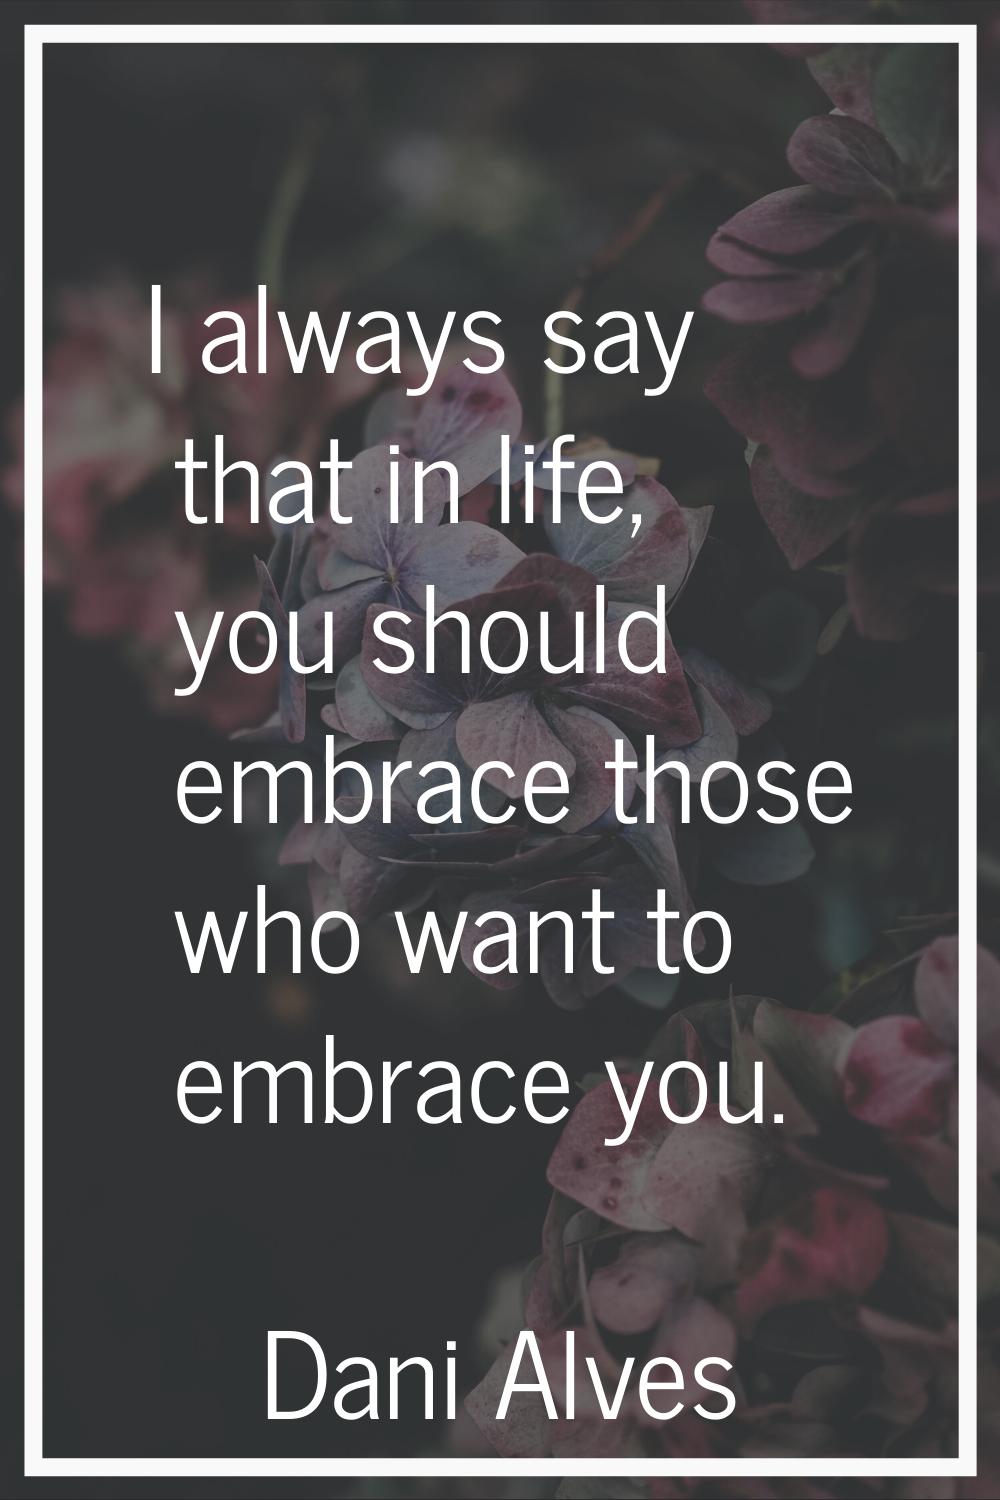 I always say that in life, you should embrace those who want to embrace you.